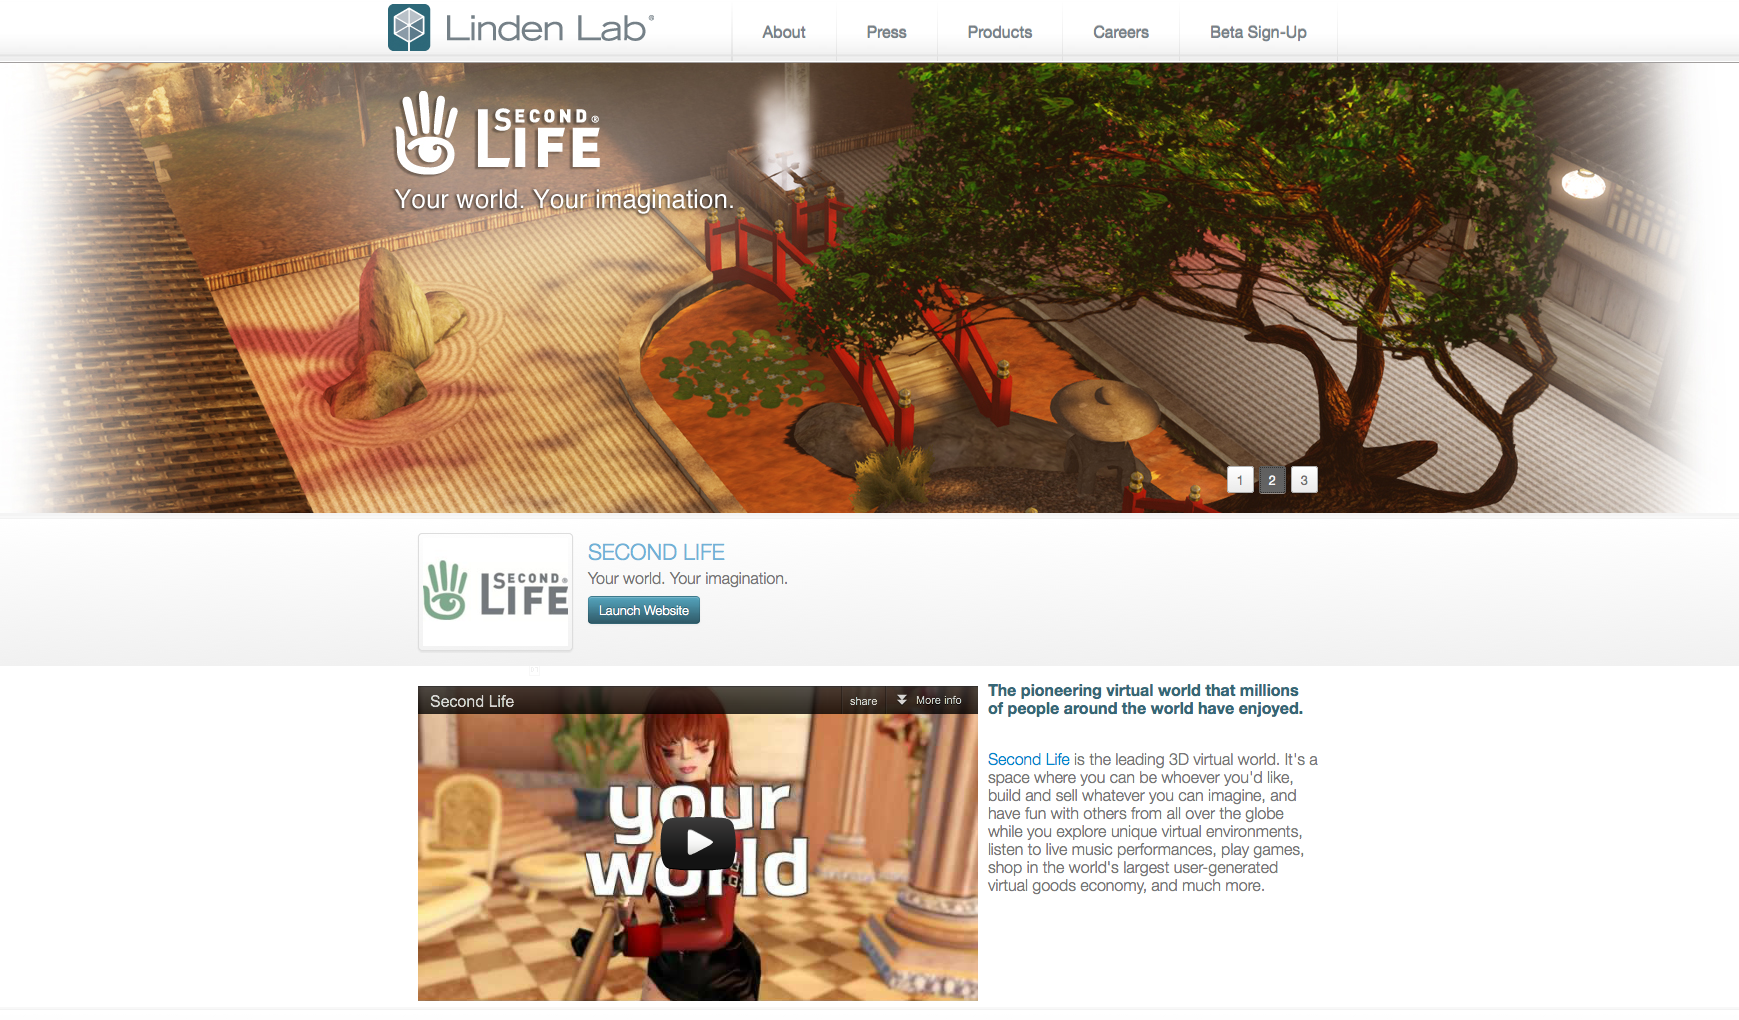 The Second Life of Linden Lab